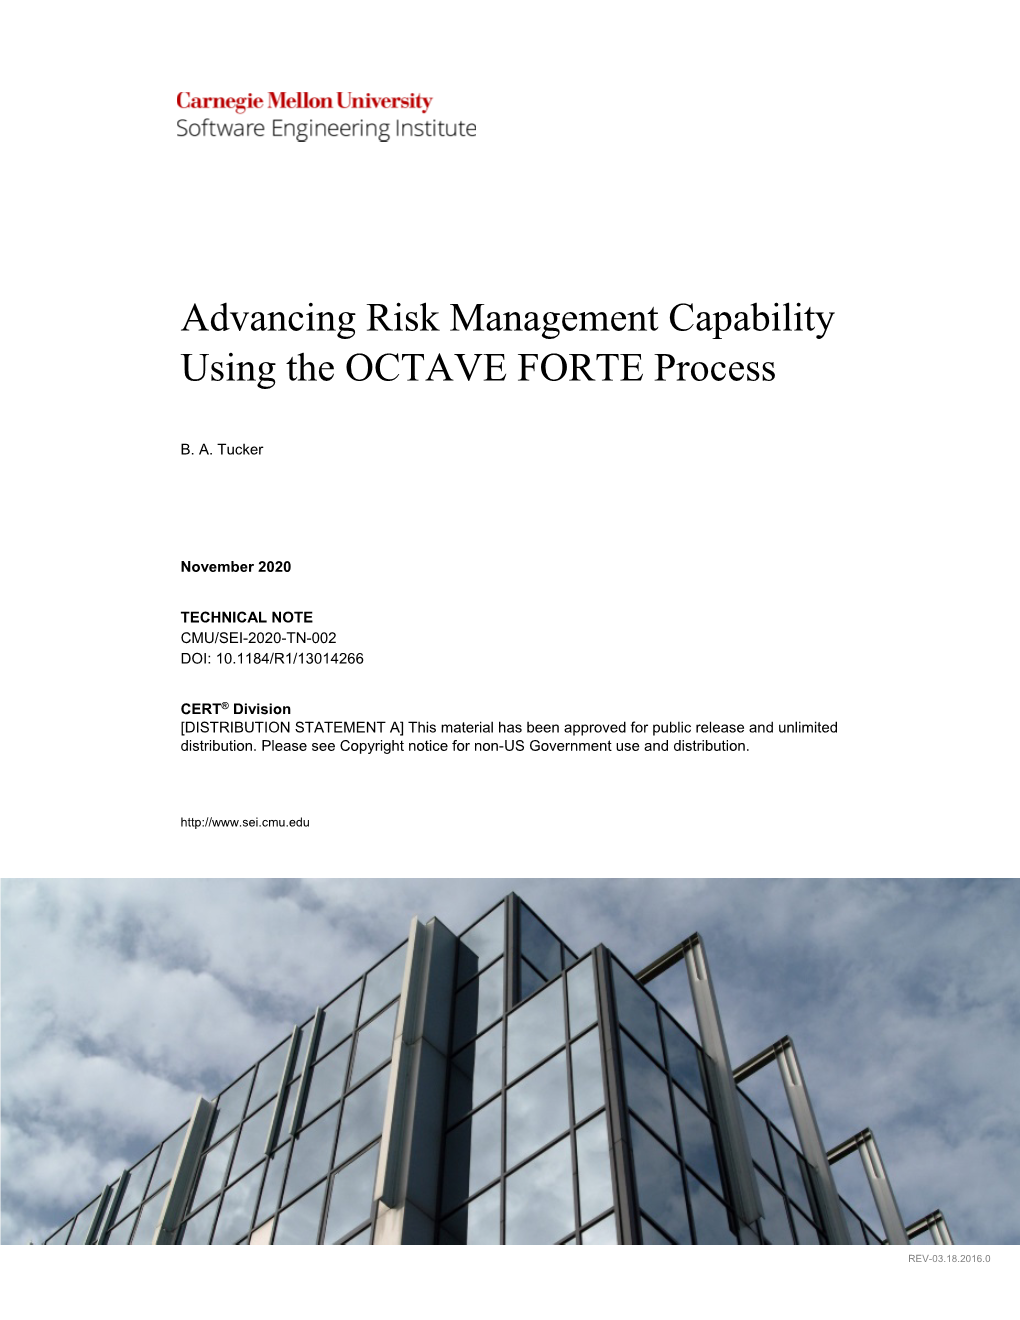 Advancing Risk Management Capability Using the OCTAVE FORTE Process